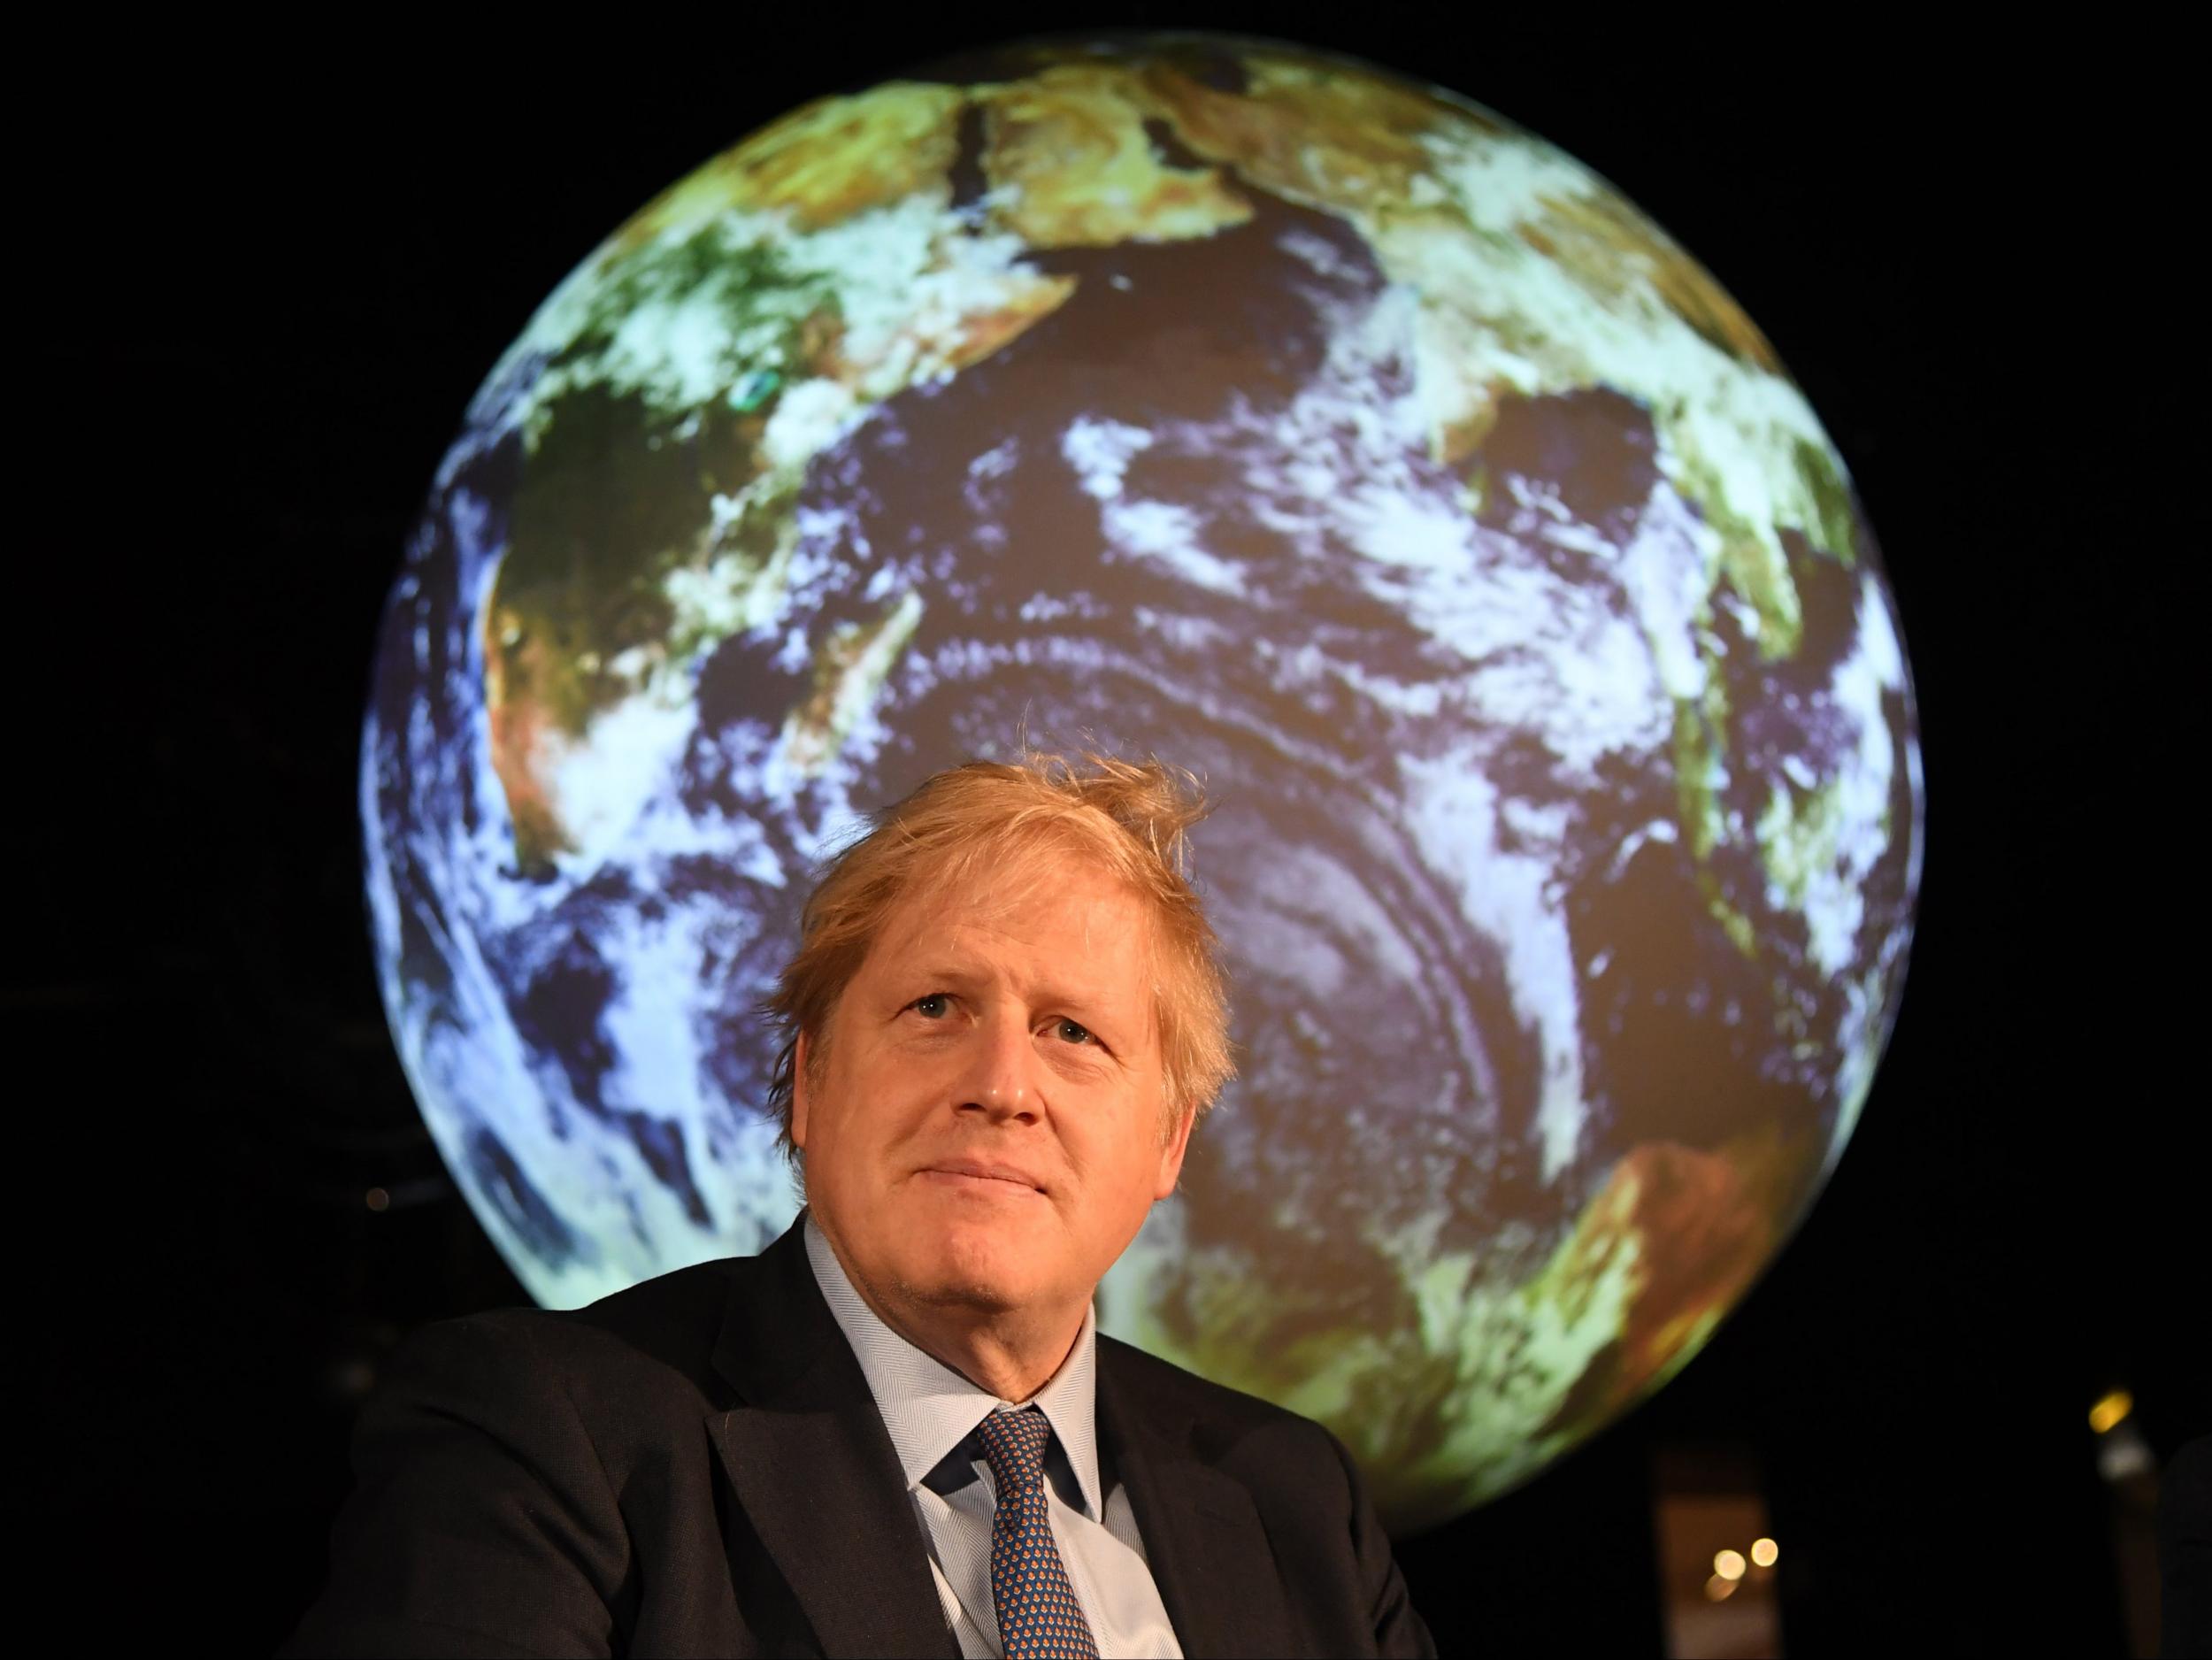 PM Boris Johnson will act as president of the UN Climate Change Conference in Glasgow from 1 November